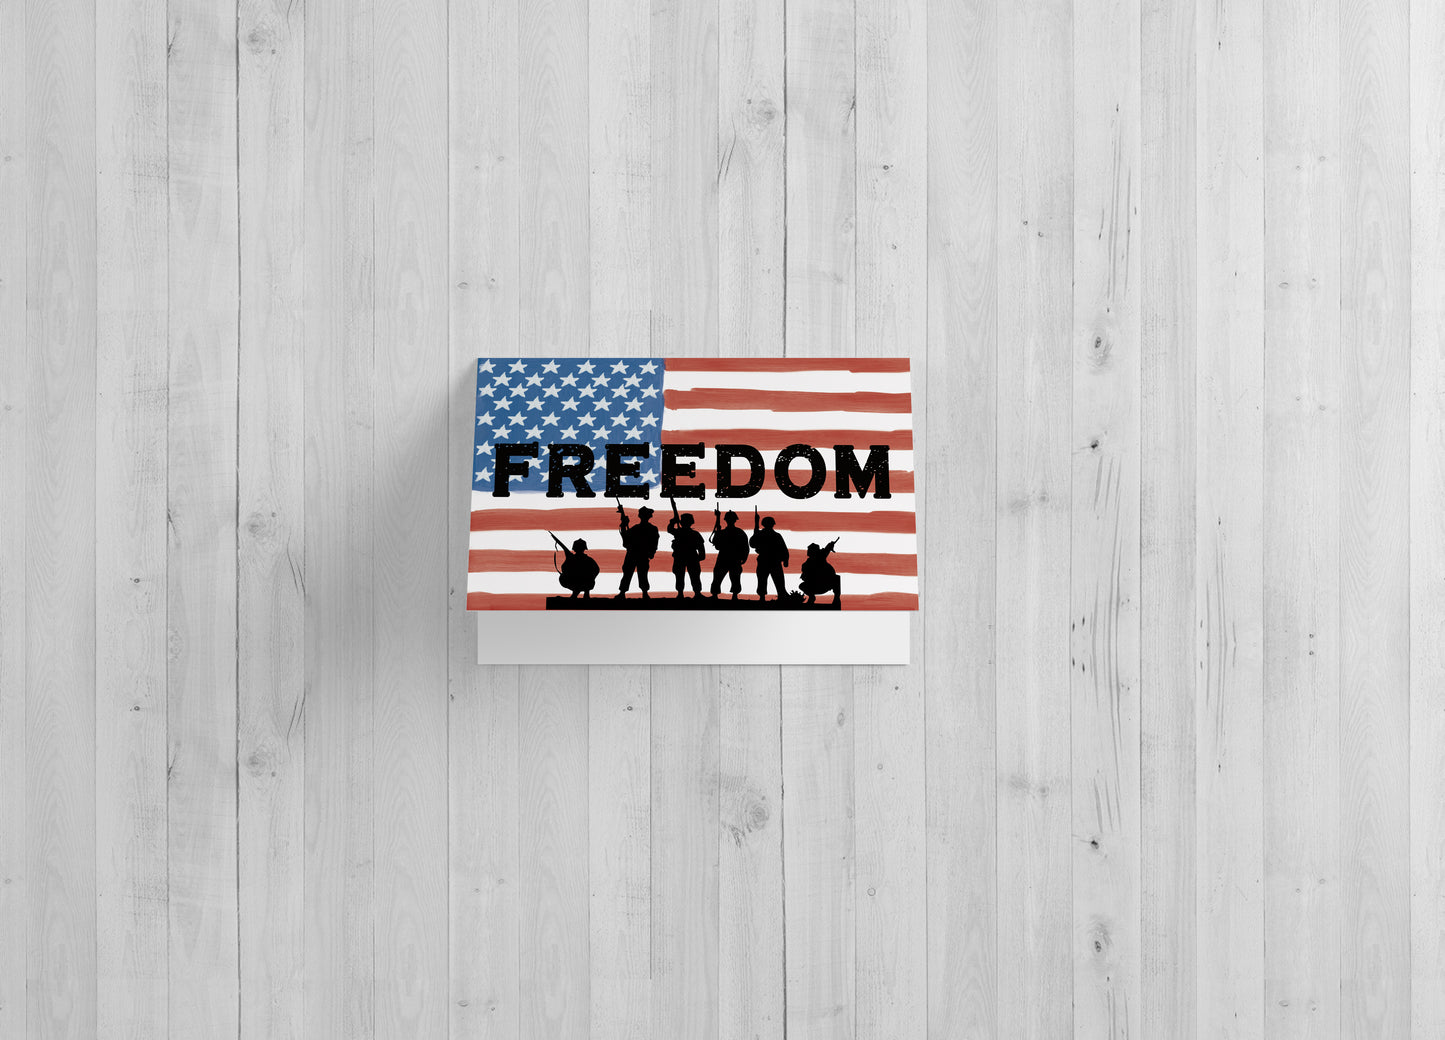 Military Freedom - Includes 25 cards